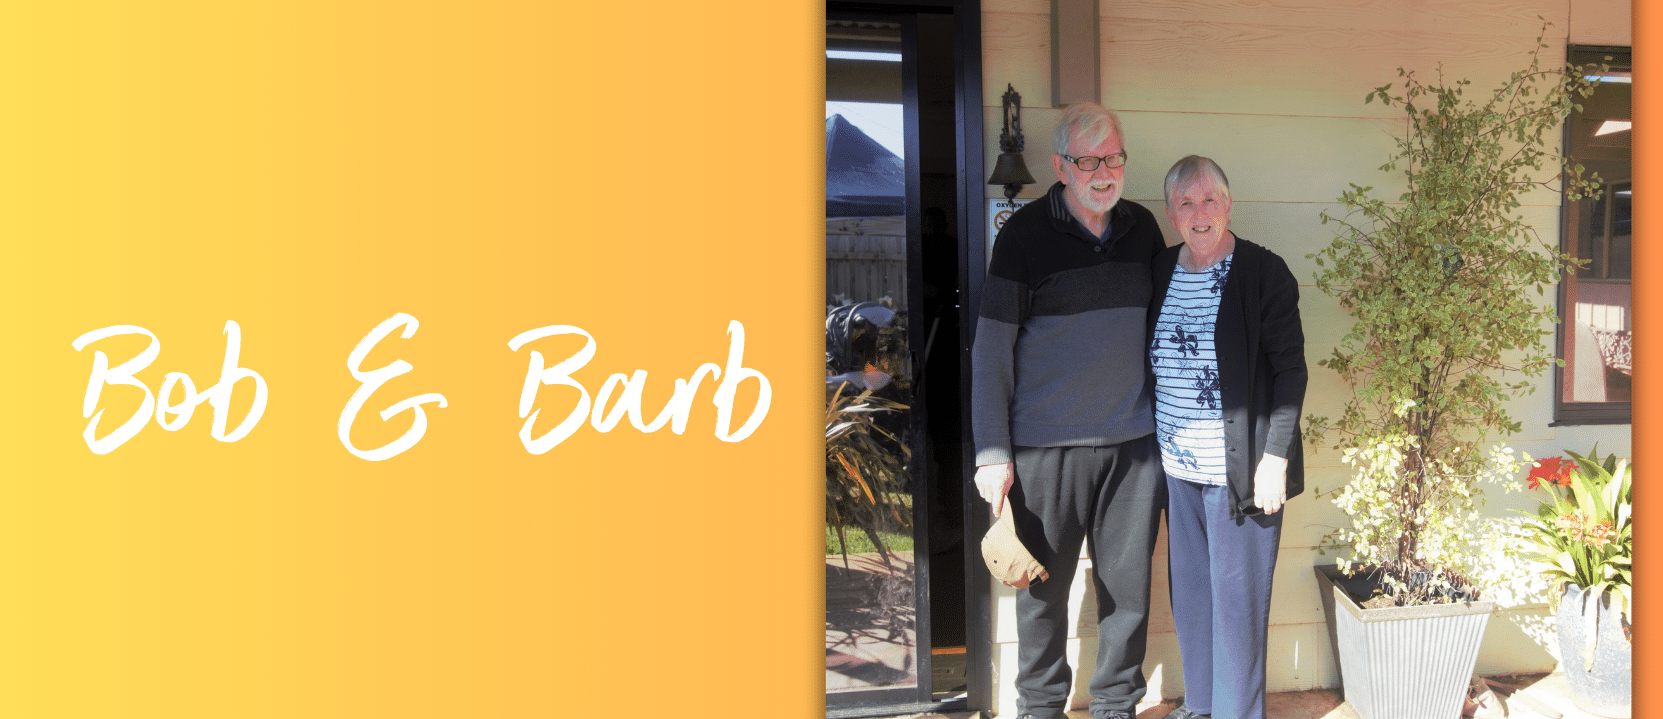 Hearts of Gold: A home makeover for dedicated carers Bob and Barb